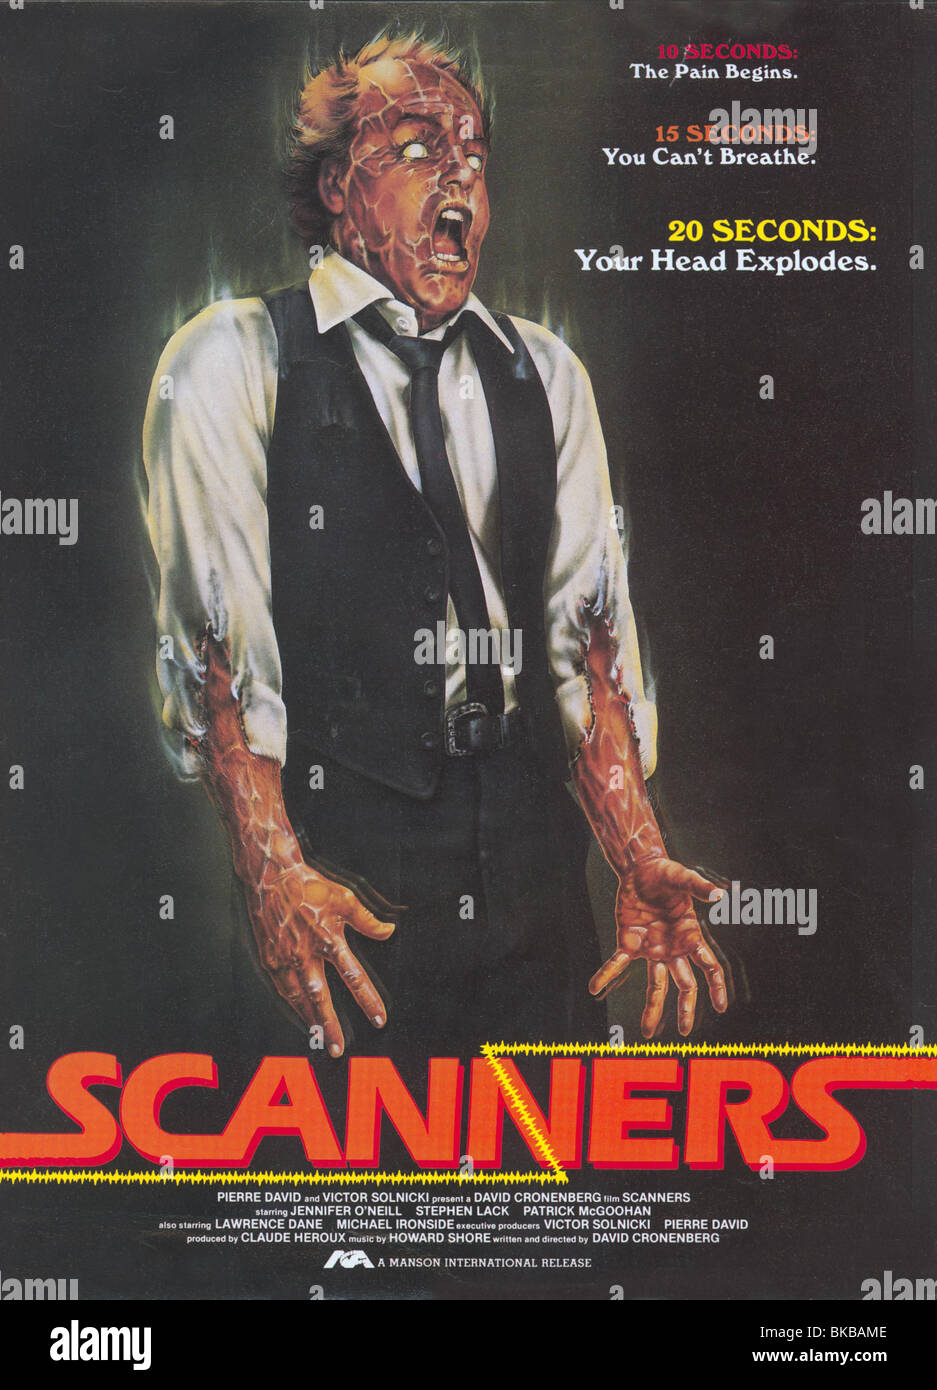 scanners 2 movie